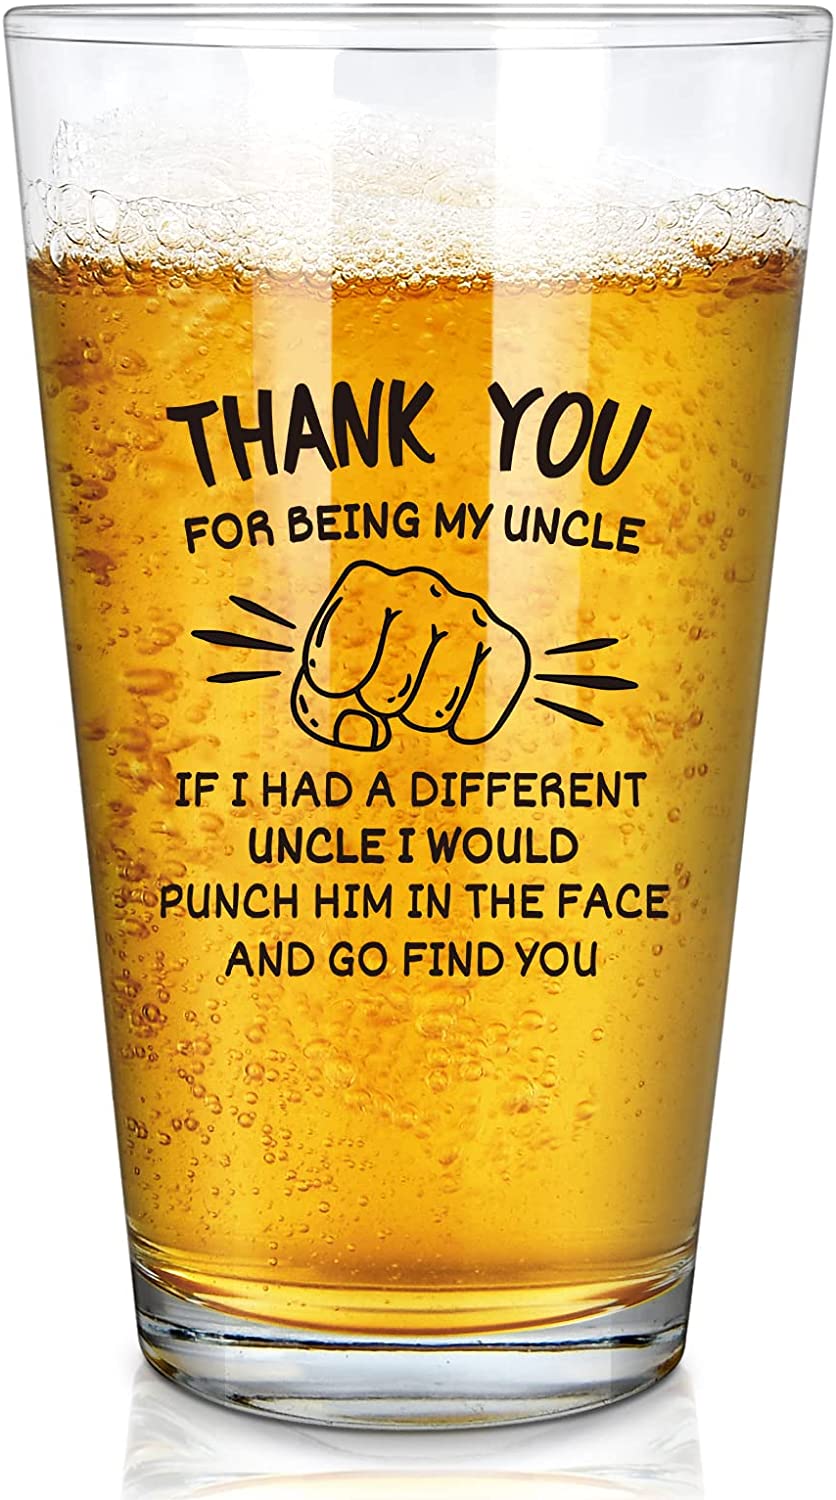 The Perfect Father's Day Gifts for That Special Uncle!